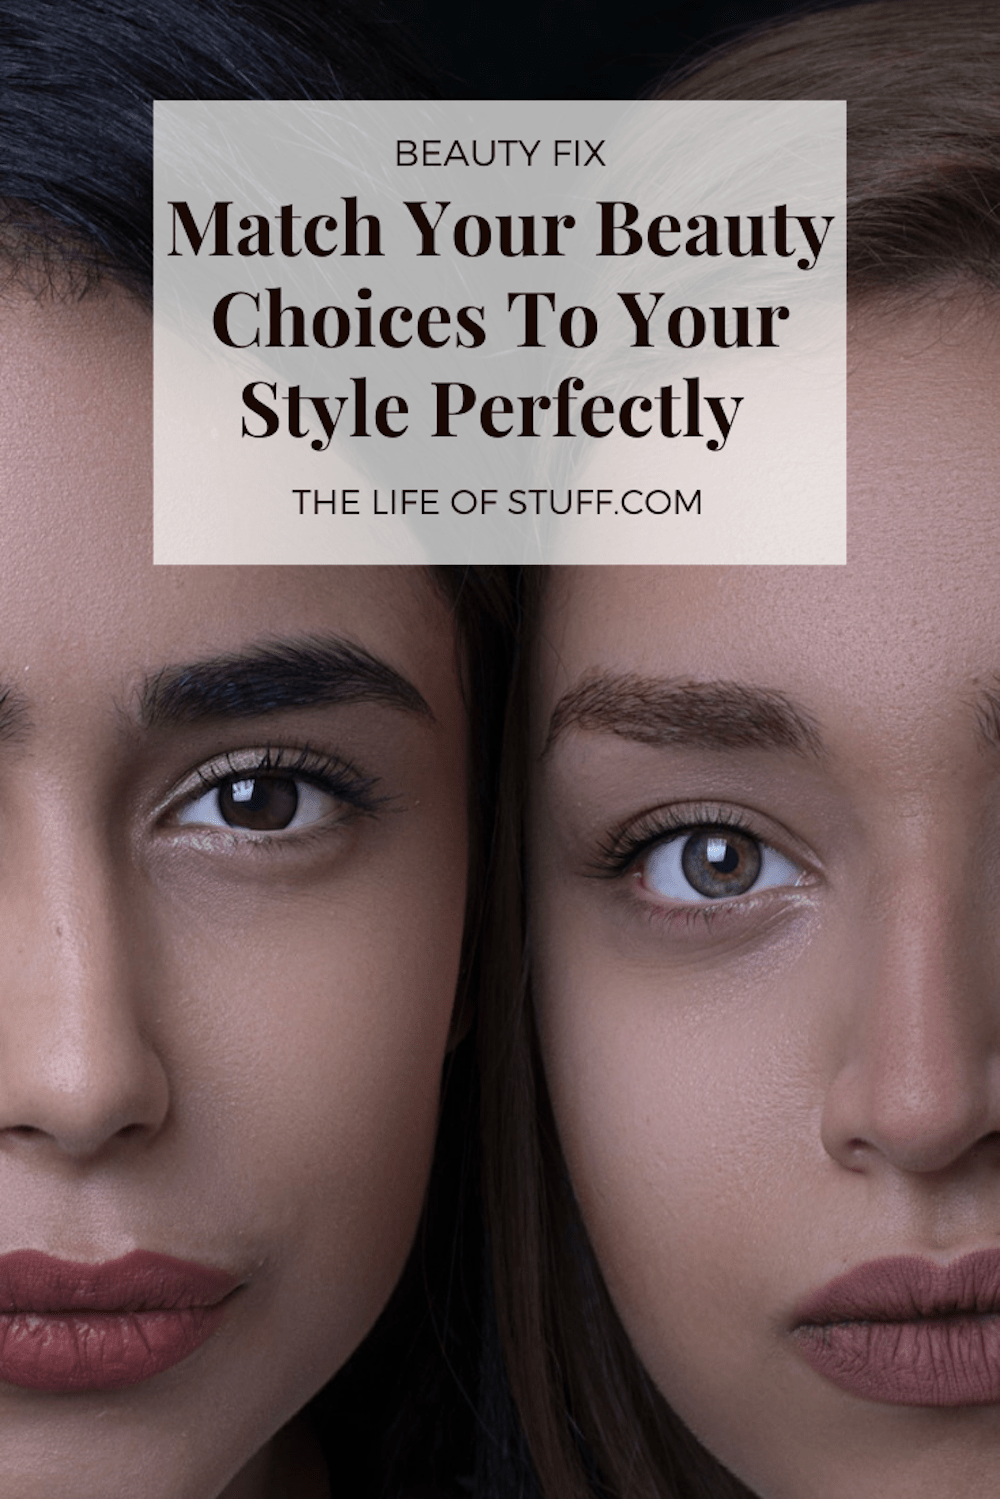 Match Your Beauty Choices To Your Style Perfectly - The Life of Stuff